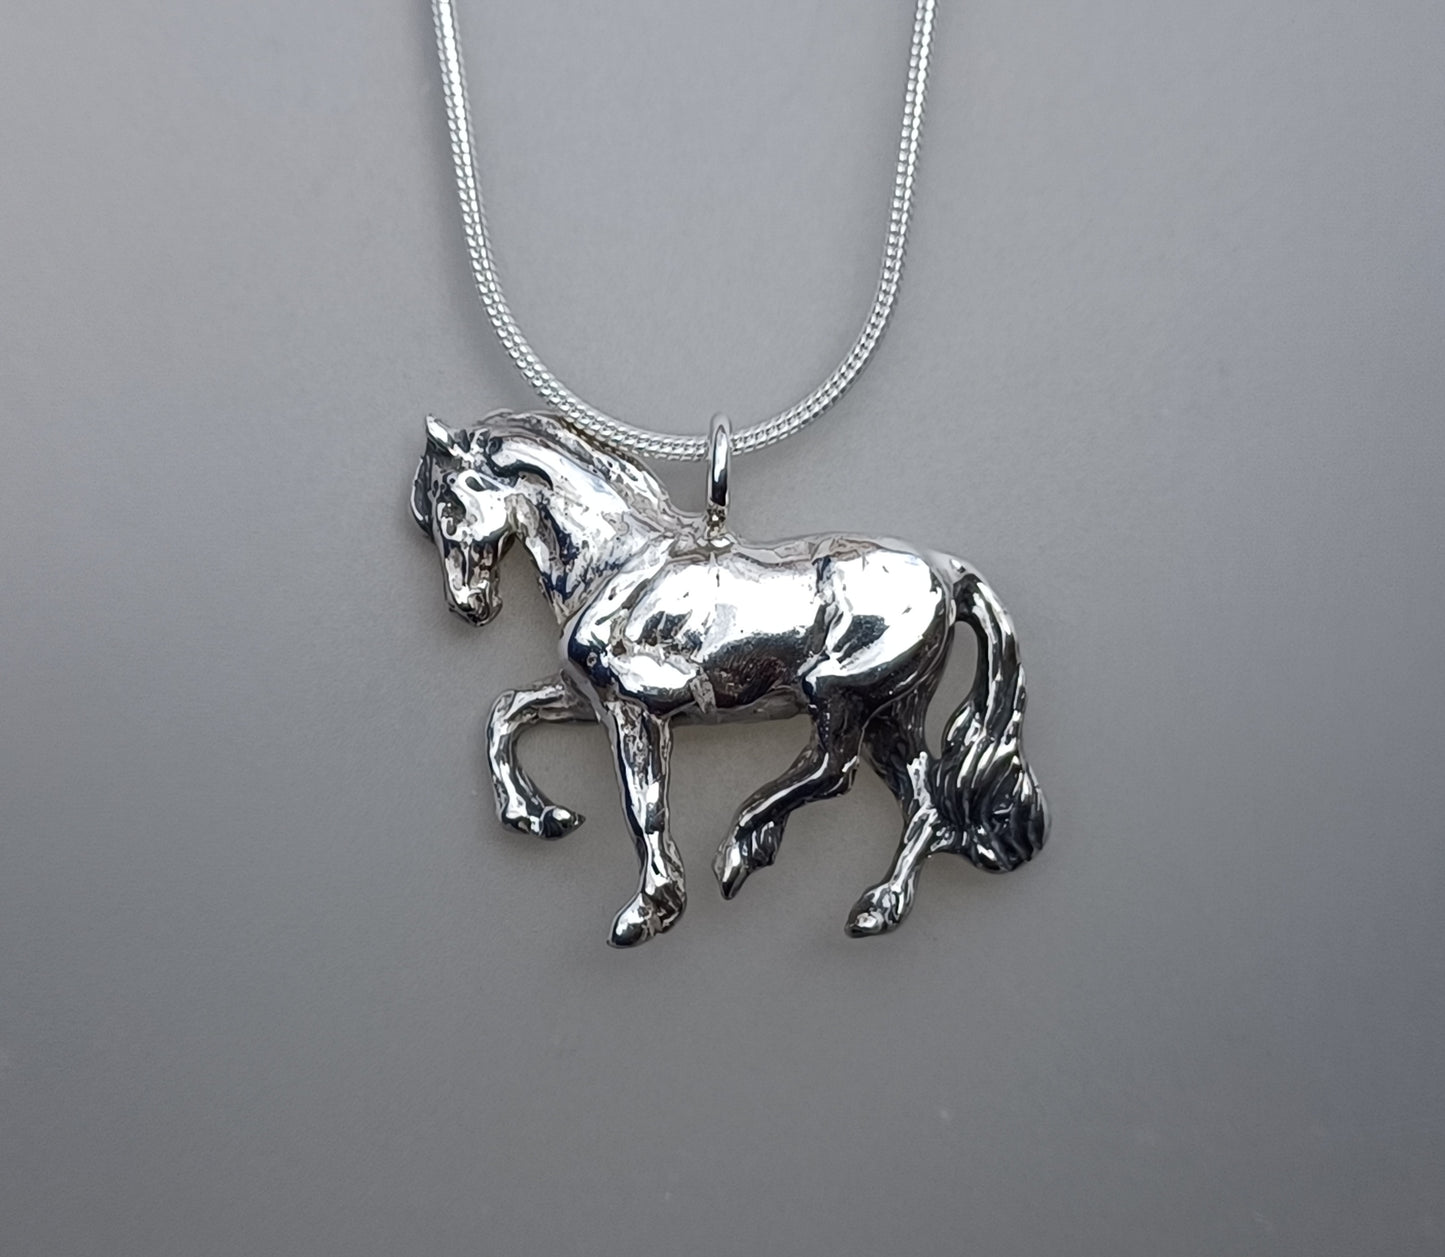 Friesian horse necklace SOLID sterling silver pendant and chain,  jewelry Forge Hill Sculpture Equestrian horse jewelry Zimmer